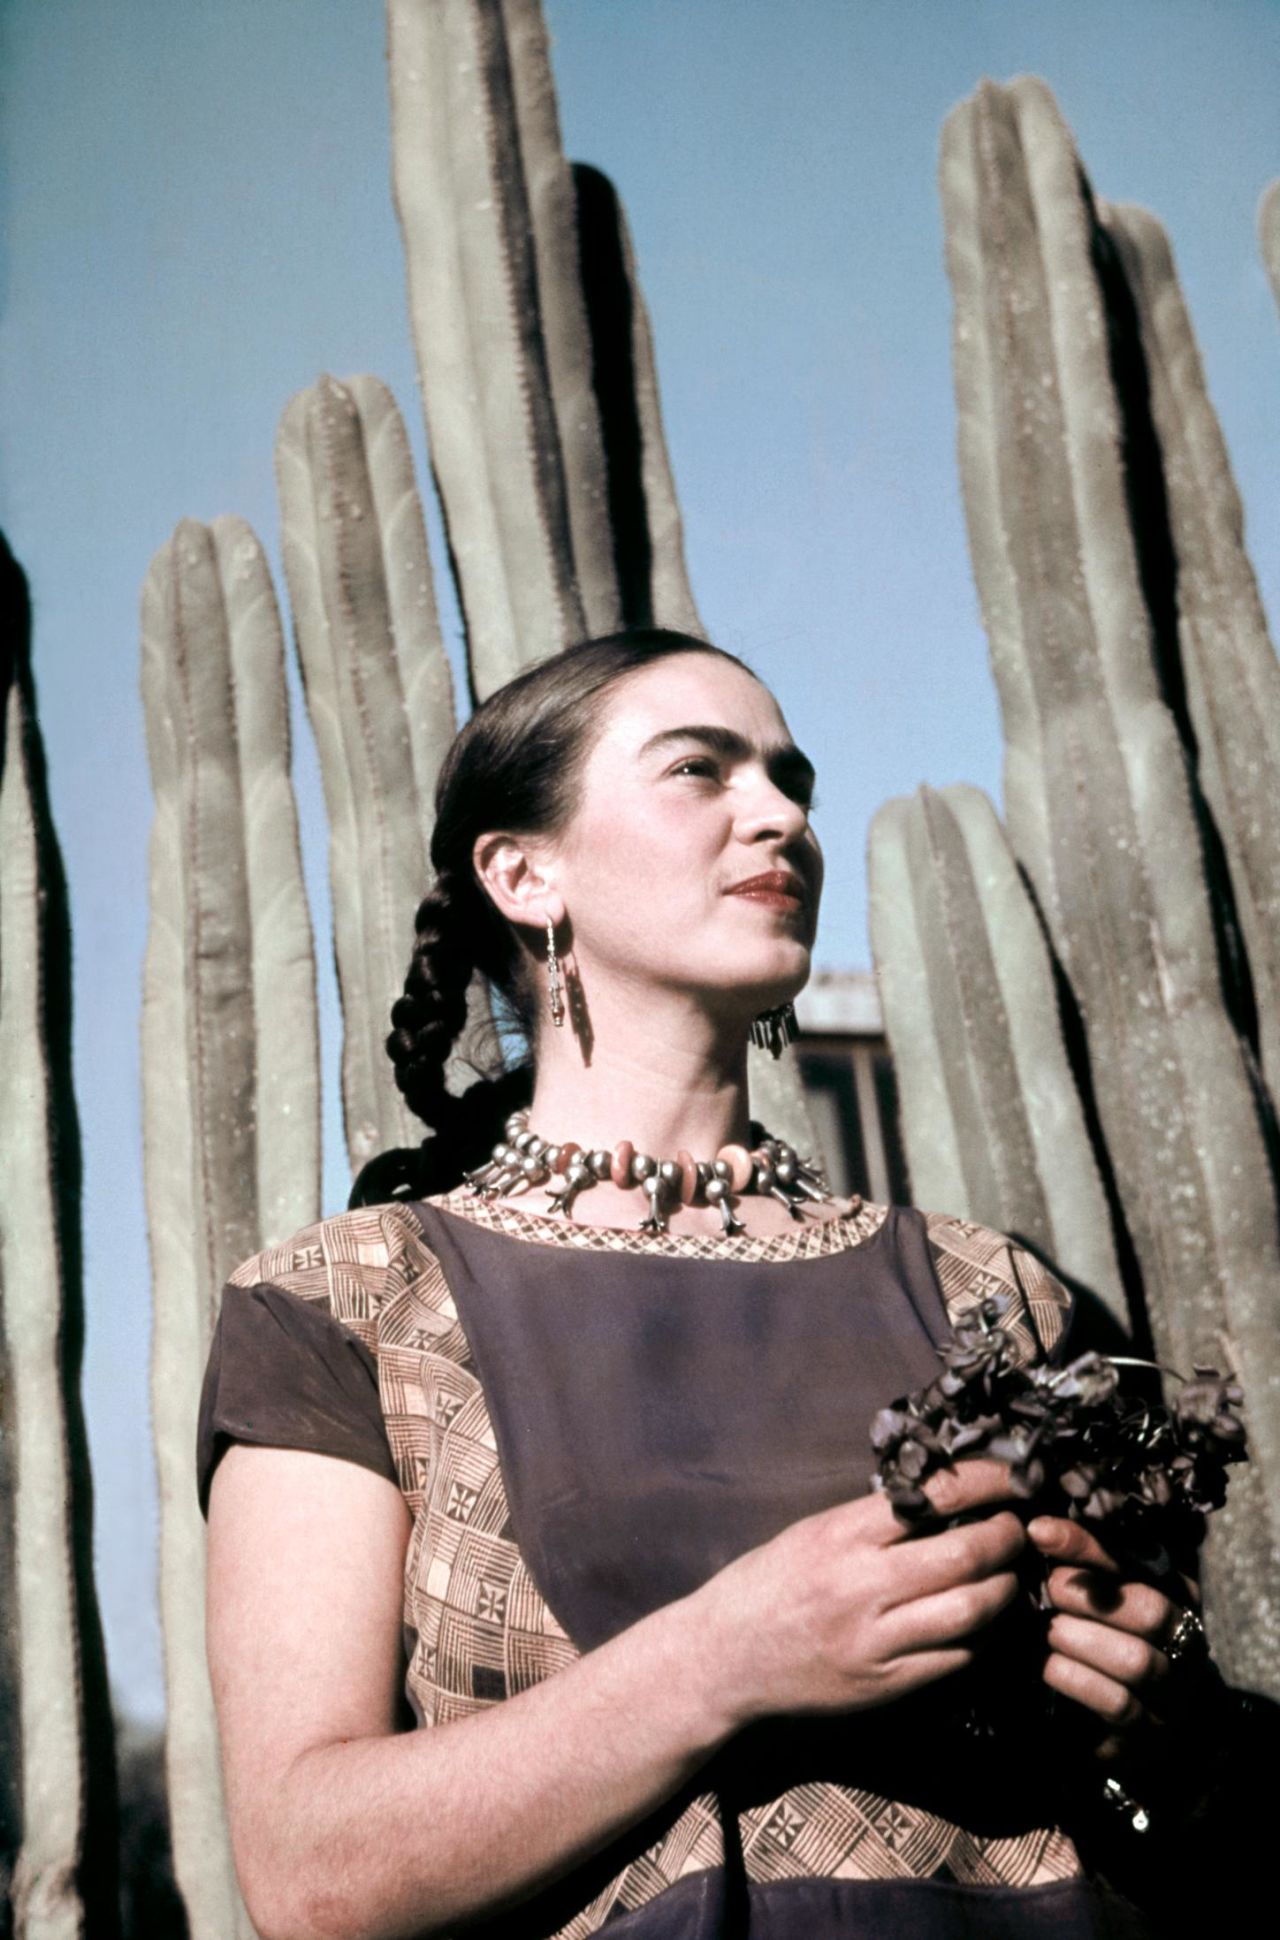 Frida Kahlo poses outside her home and studio in Mexico City circa 1940.